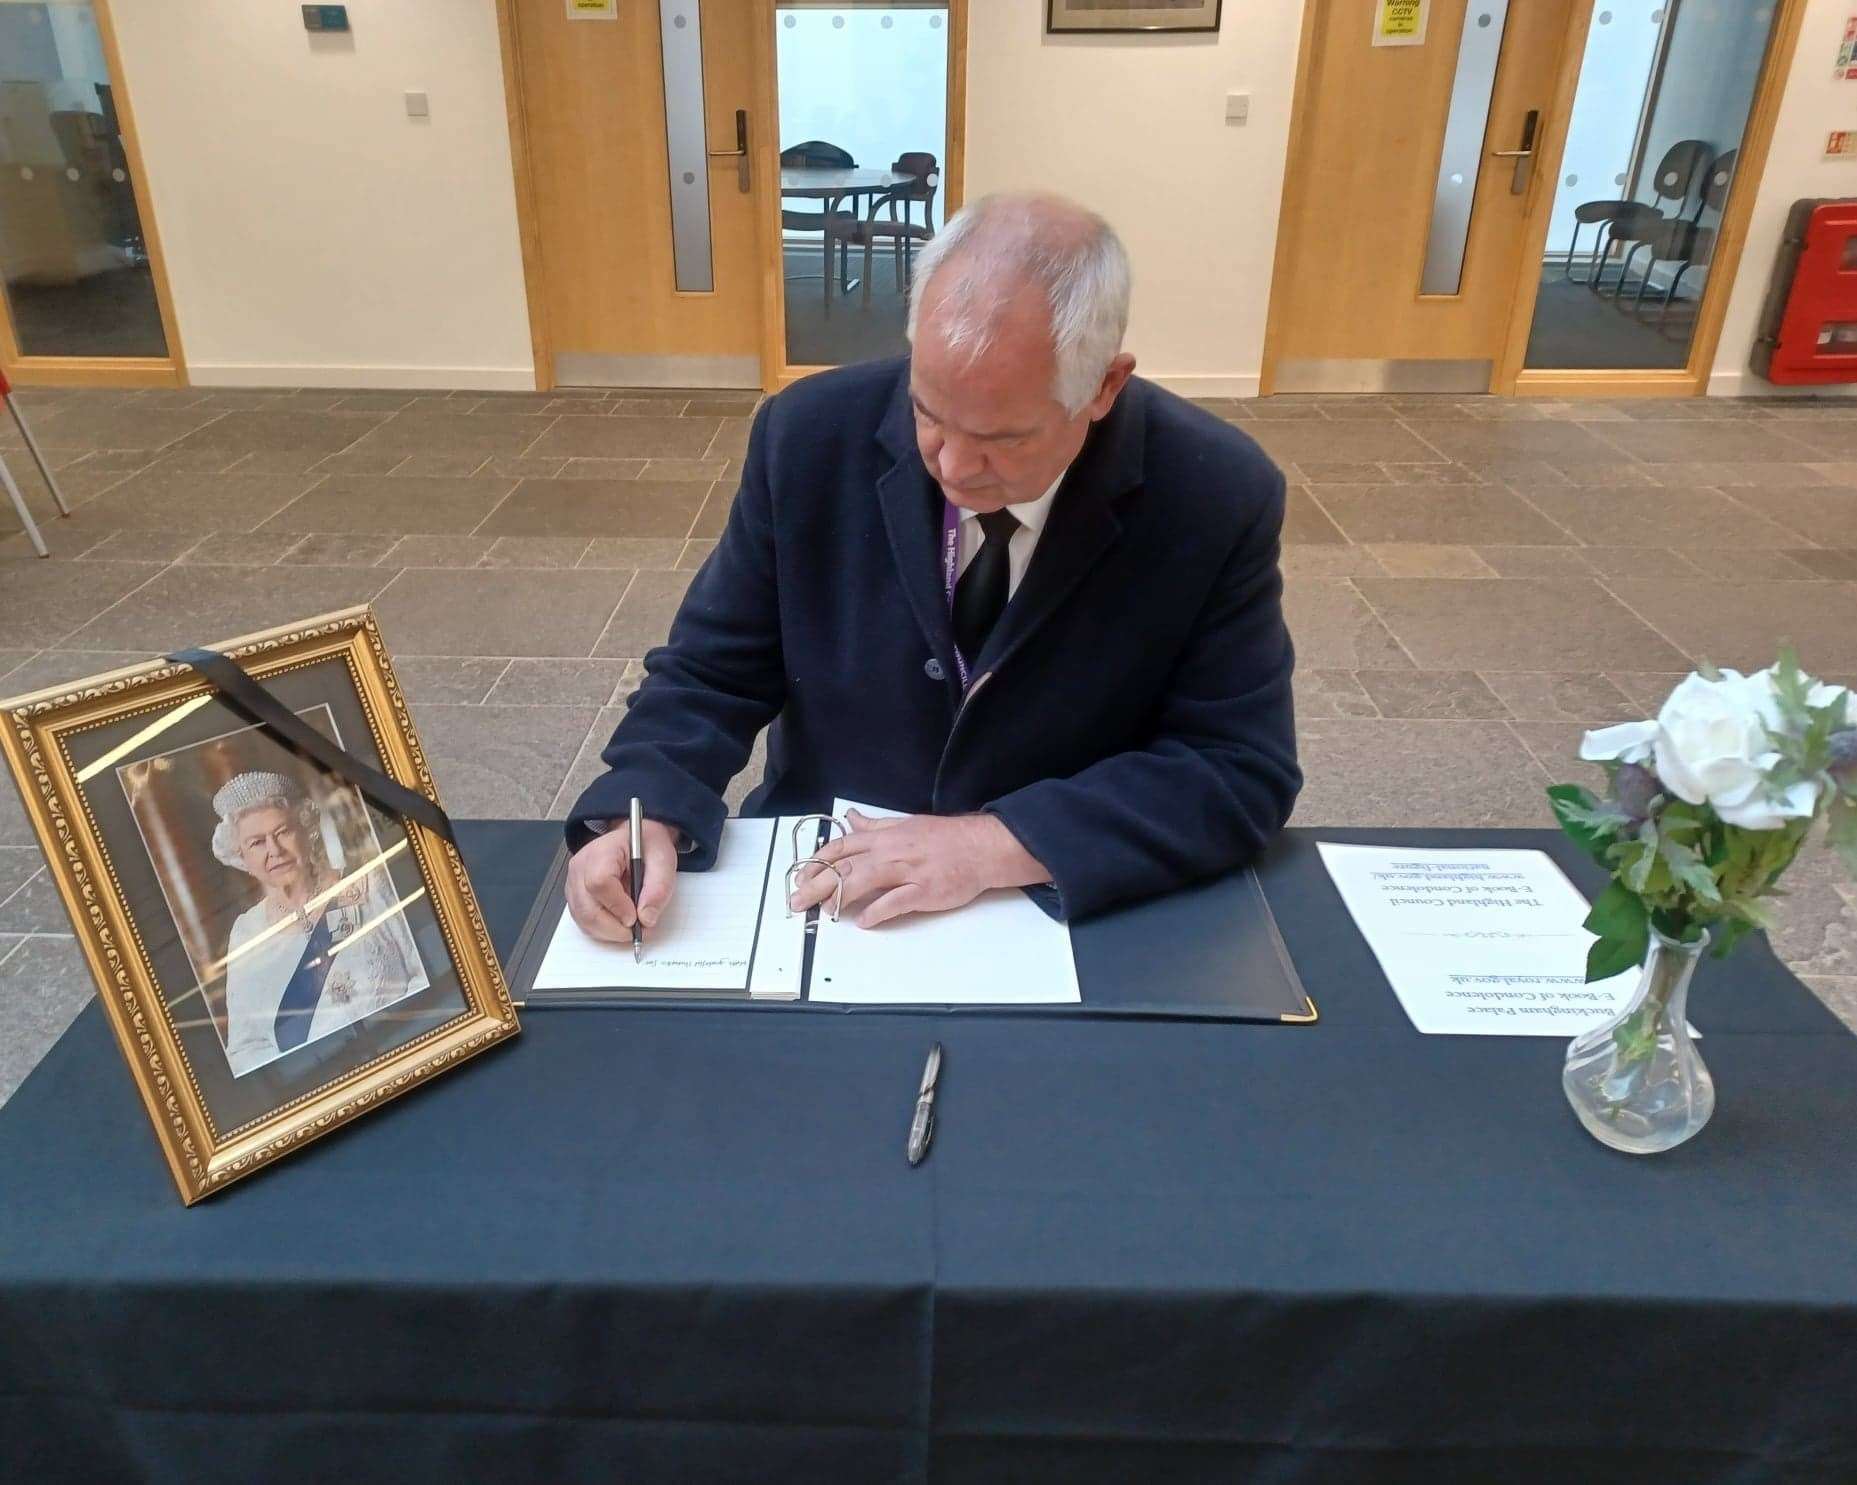 Highland Council leader Raymond Bremner signing the book of condolence at Wick.